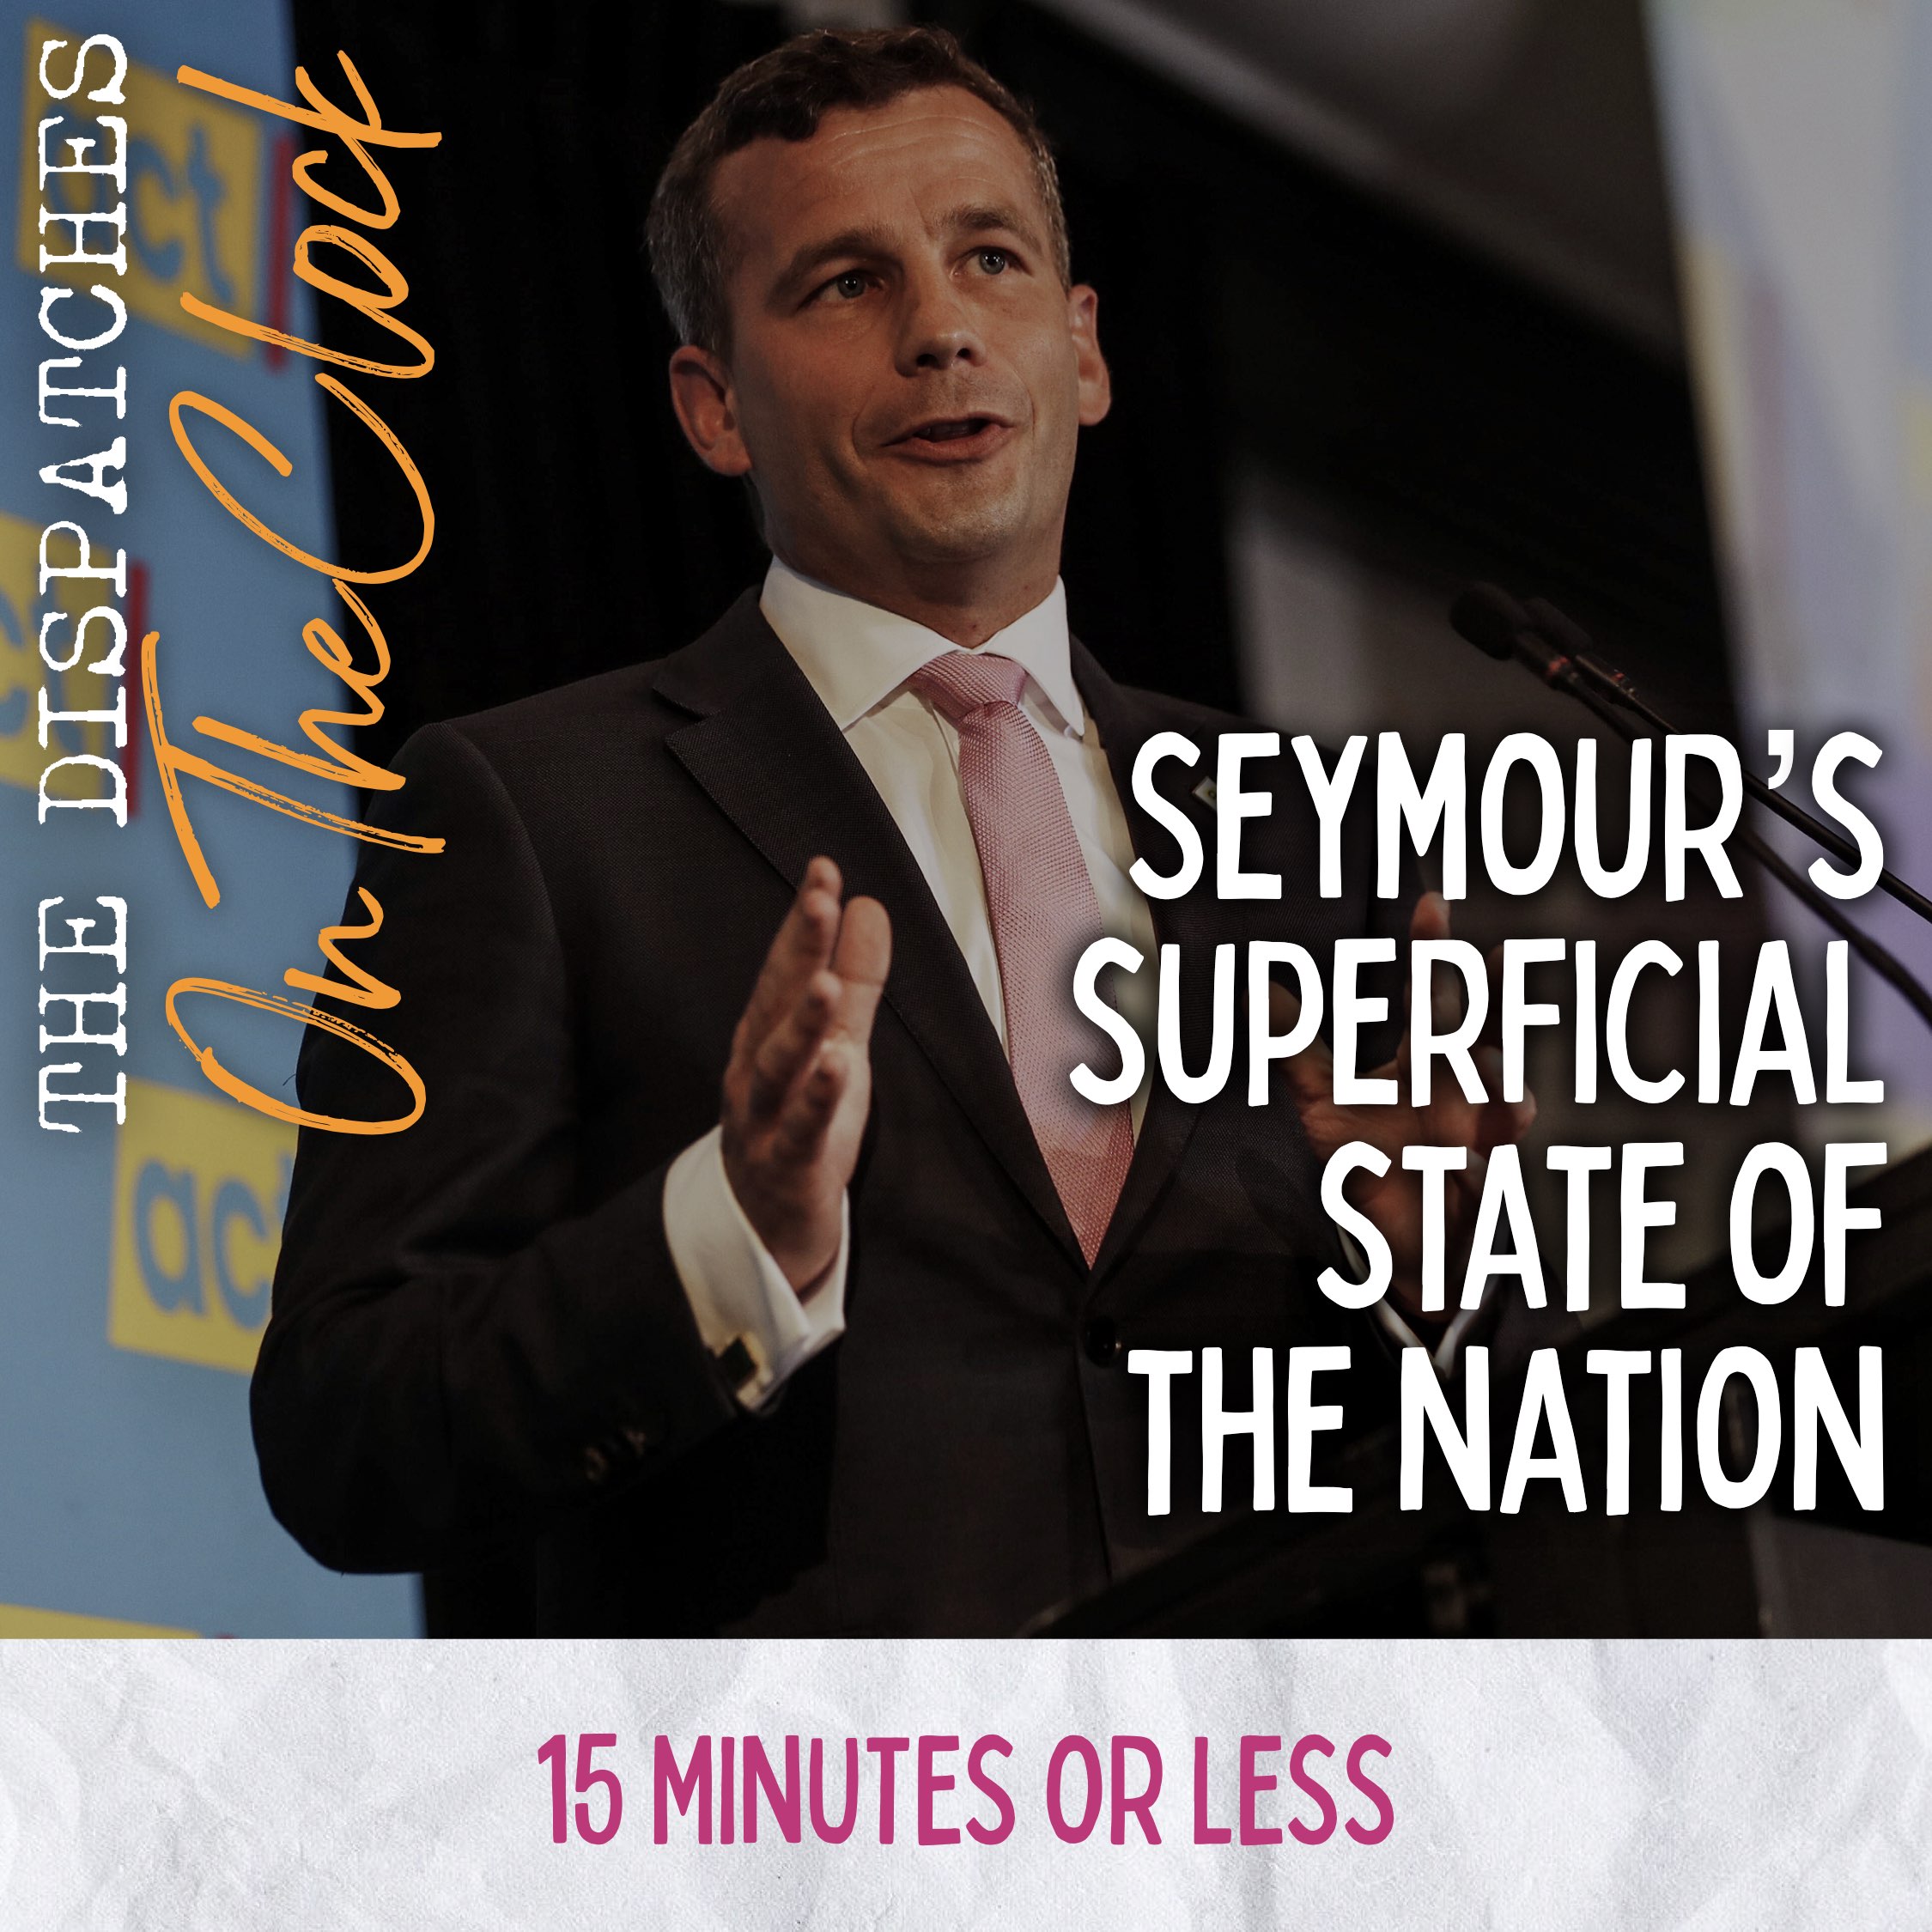 ON THE CLOCK | Seymour’s Superficial State of the Nation